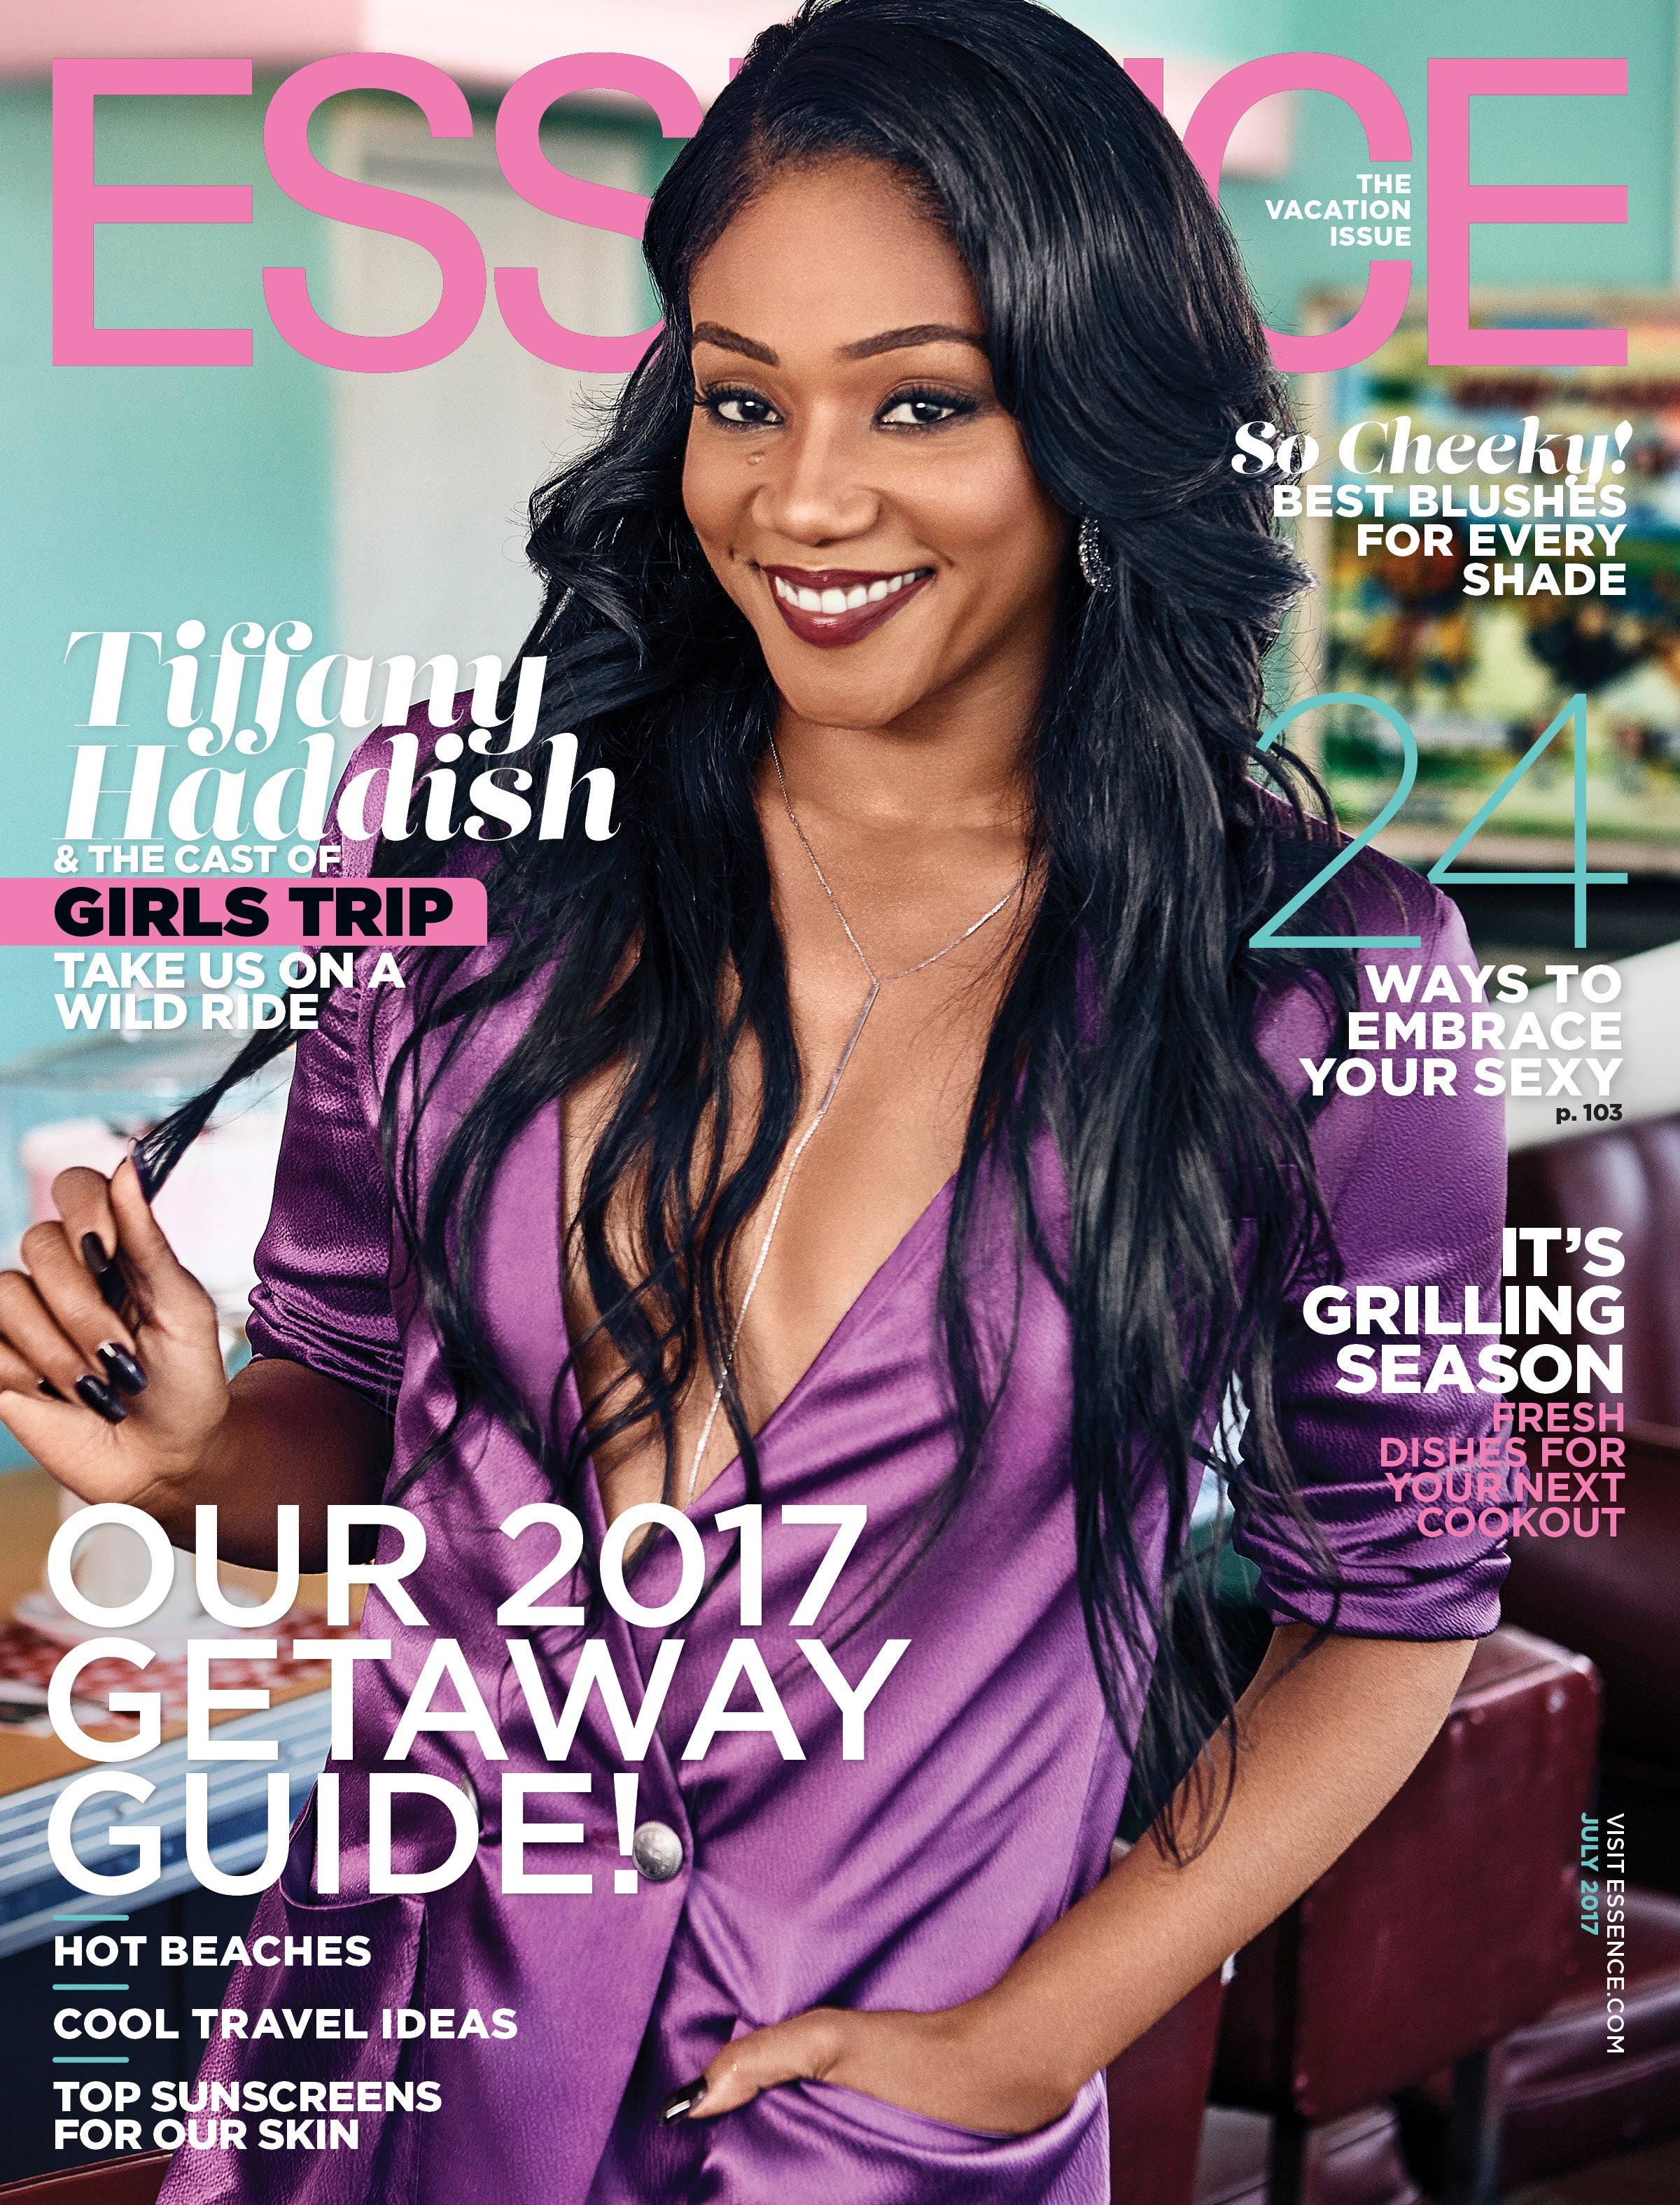 14 Hilarious Tiffany Haddish Quotes That Will Get You Through Life
